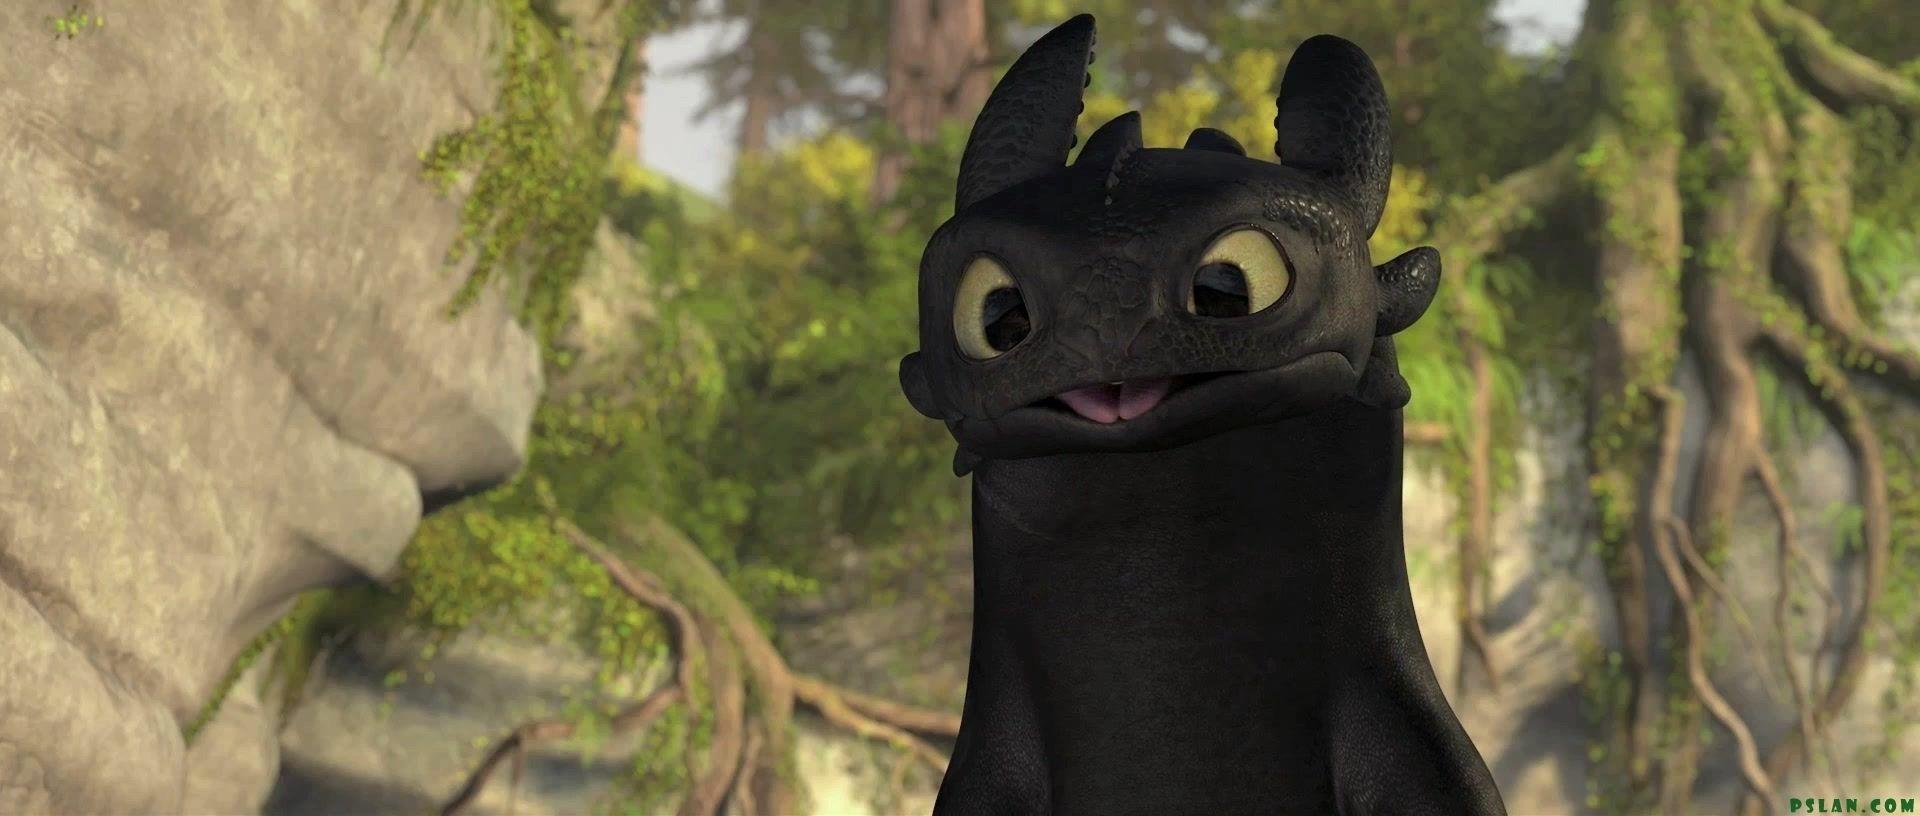 Toothless True Fanclub image Great pic of Toothless HD wallpaper